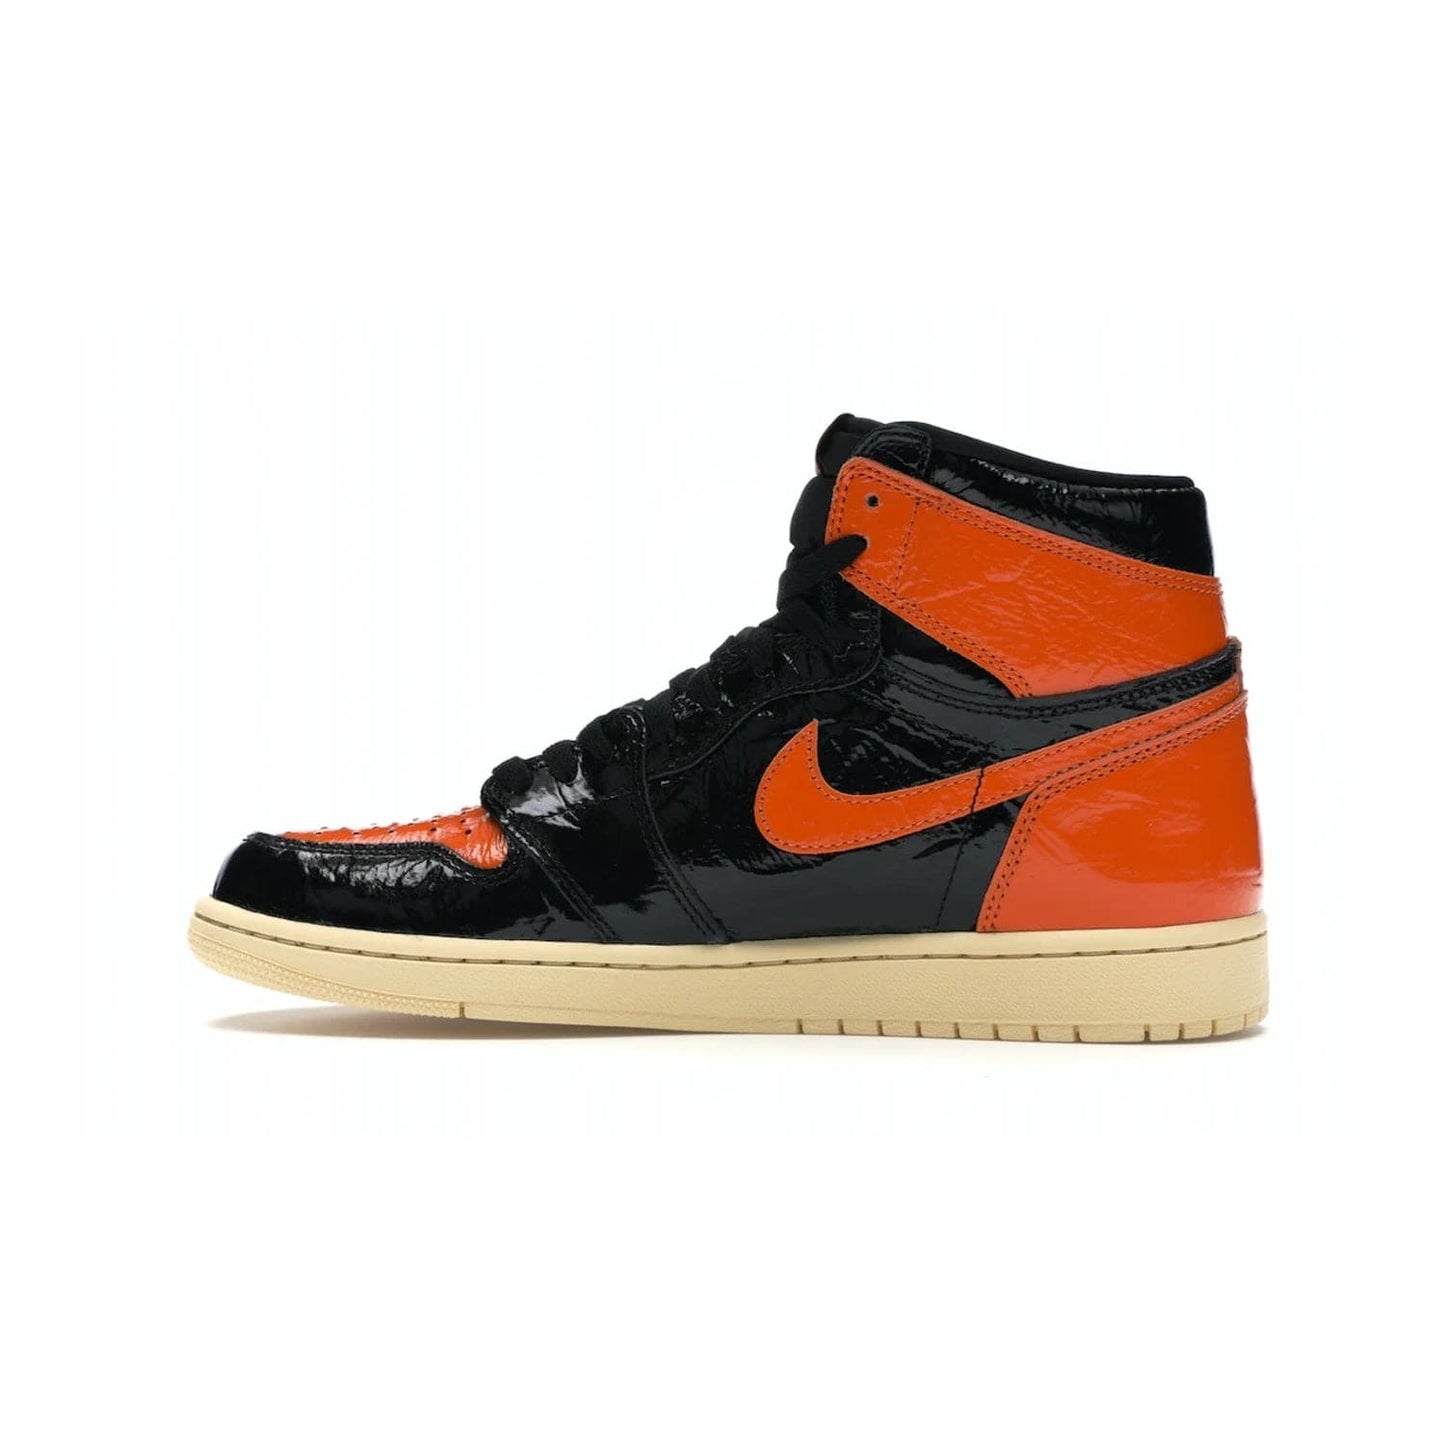 Jordan 1 Retro High Shattered Backboard 3.0 - Image 20 - Only at www.BallersClubKickz.com - #
Jordan 1 Retro High Shattered Backboard 3.0: the perfect blend of modern style and nostalgic flair featuring an orange and black crinkled patent leather upper and yellowed vanilla outsole. Get these exclusive sneakers released in October of 2019!